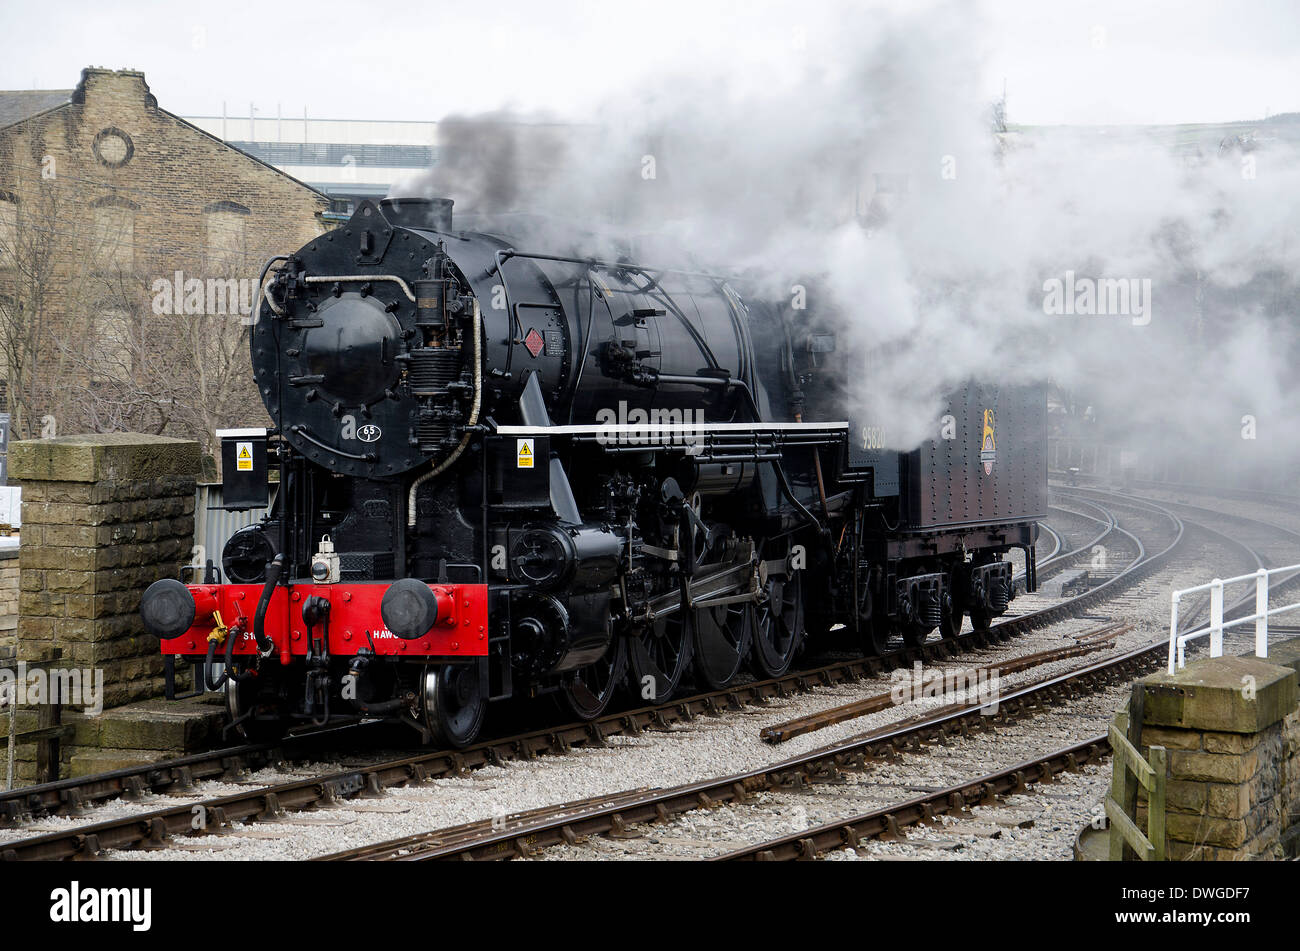 Steam Train departing with passenger service on heritage line Stock Photo